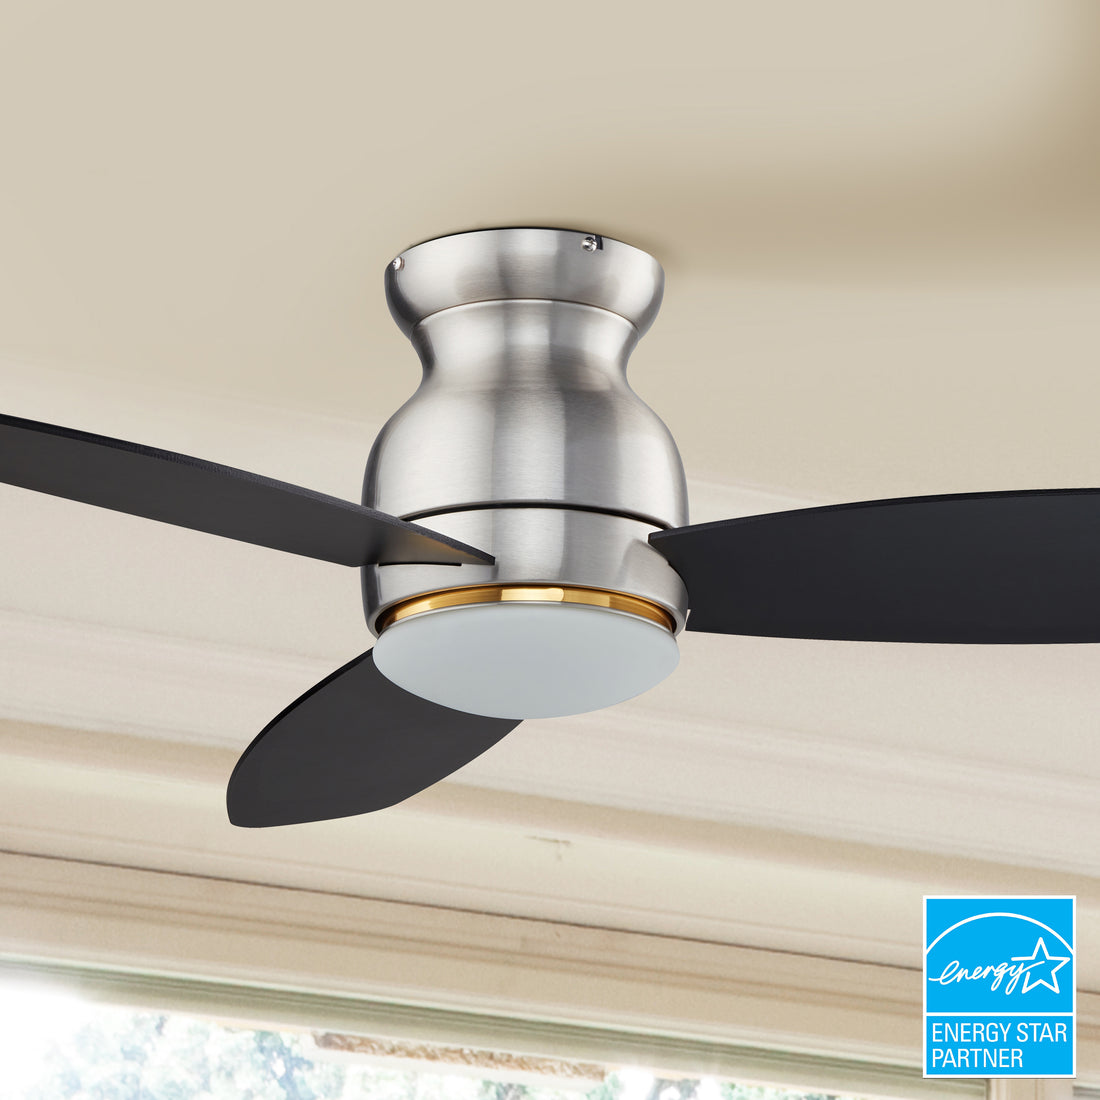 Smafan 52 inch Trendsetter smart ceiling fan designed with silver and black finish, elegant Plywood blades and integrated 4000K LED daylight. 